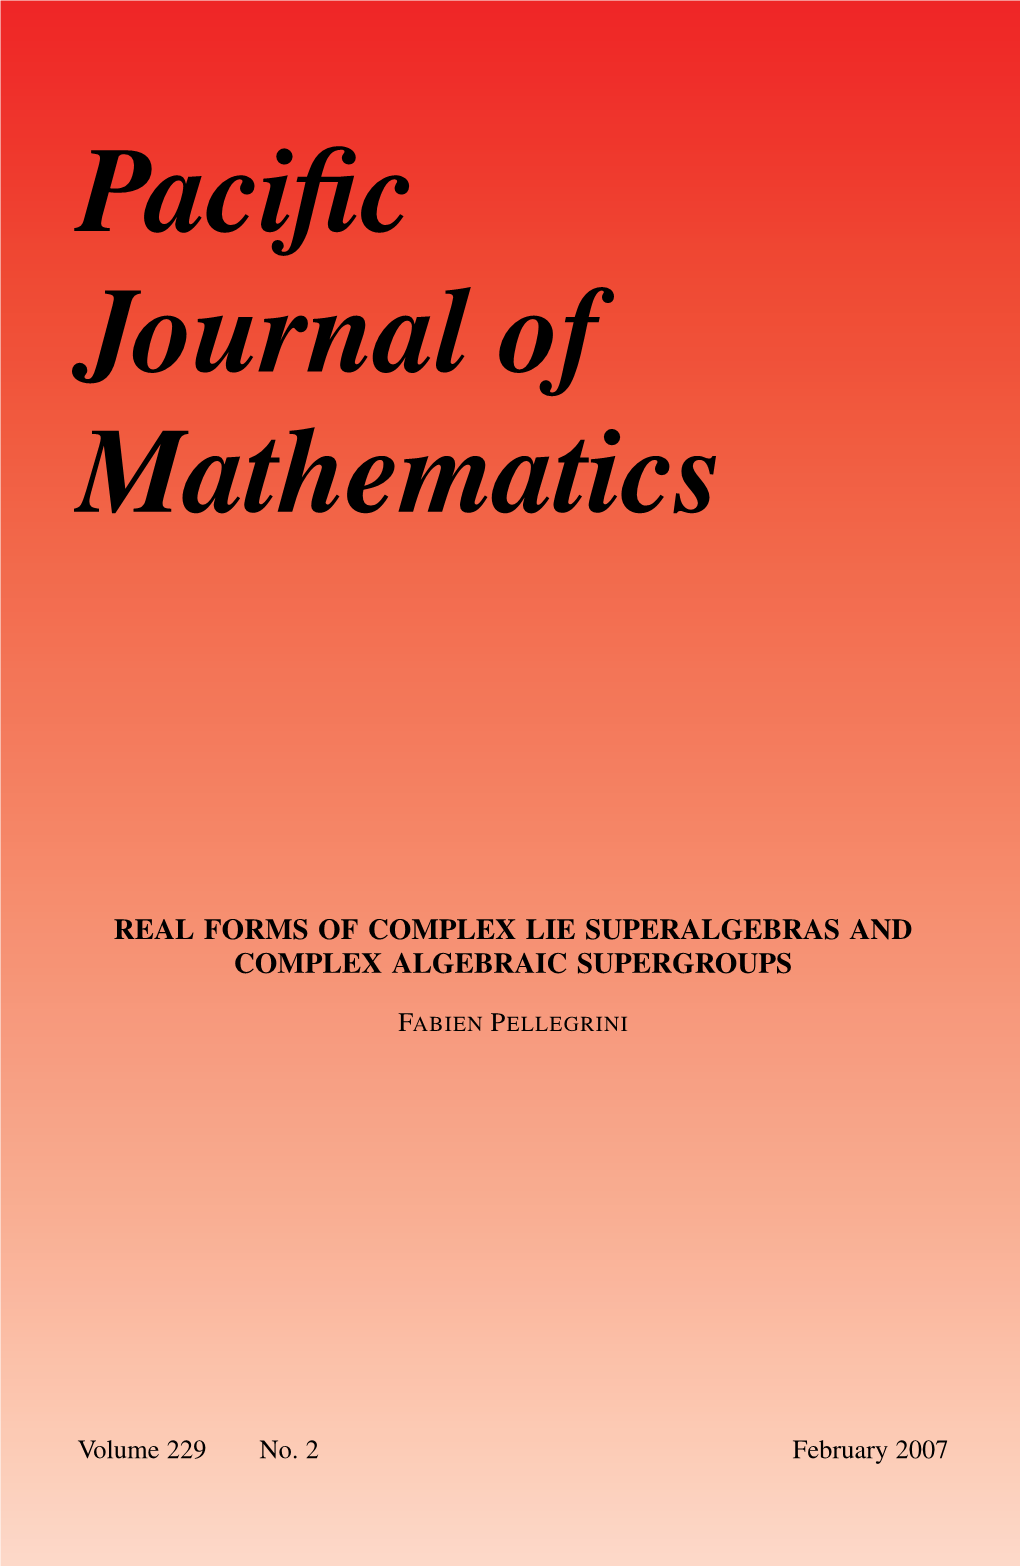 Real Forms of Complex Lie Superalgebras and Complex Algebraic Supergroups